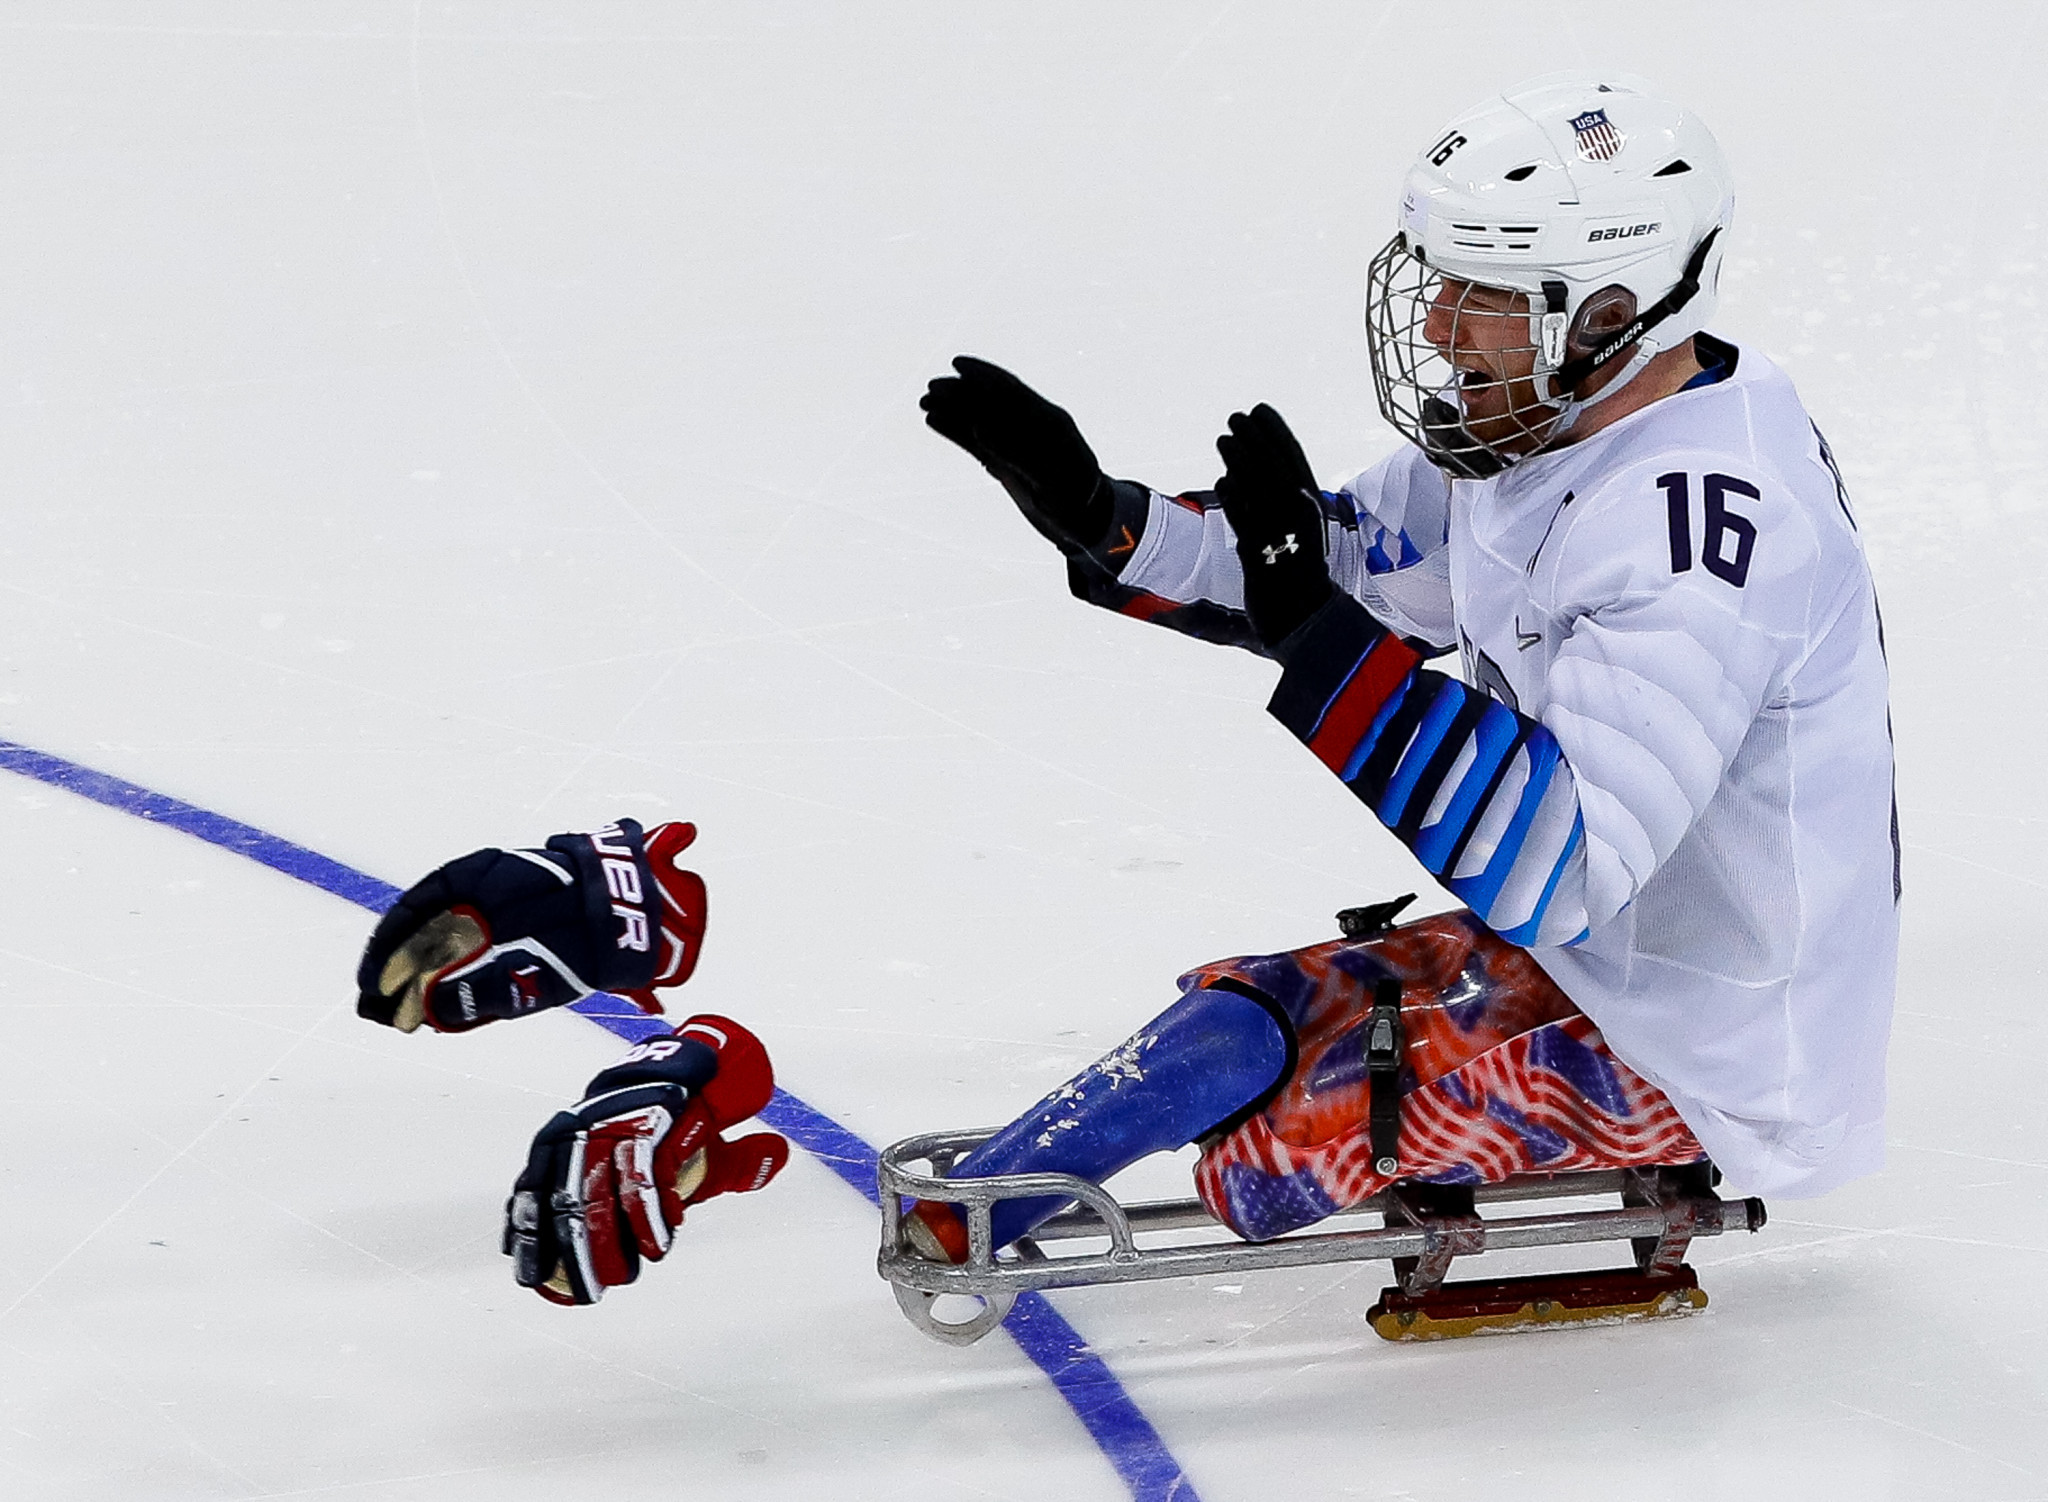 Declan Farmer of the United States celebrates scoring the goal which gave the US the gold medal in the ice hockey final at the 2018 Winter Paralympics ©Getty Images